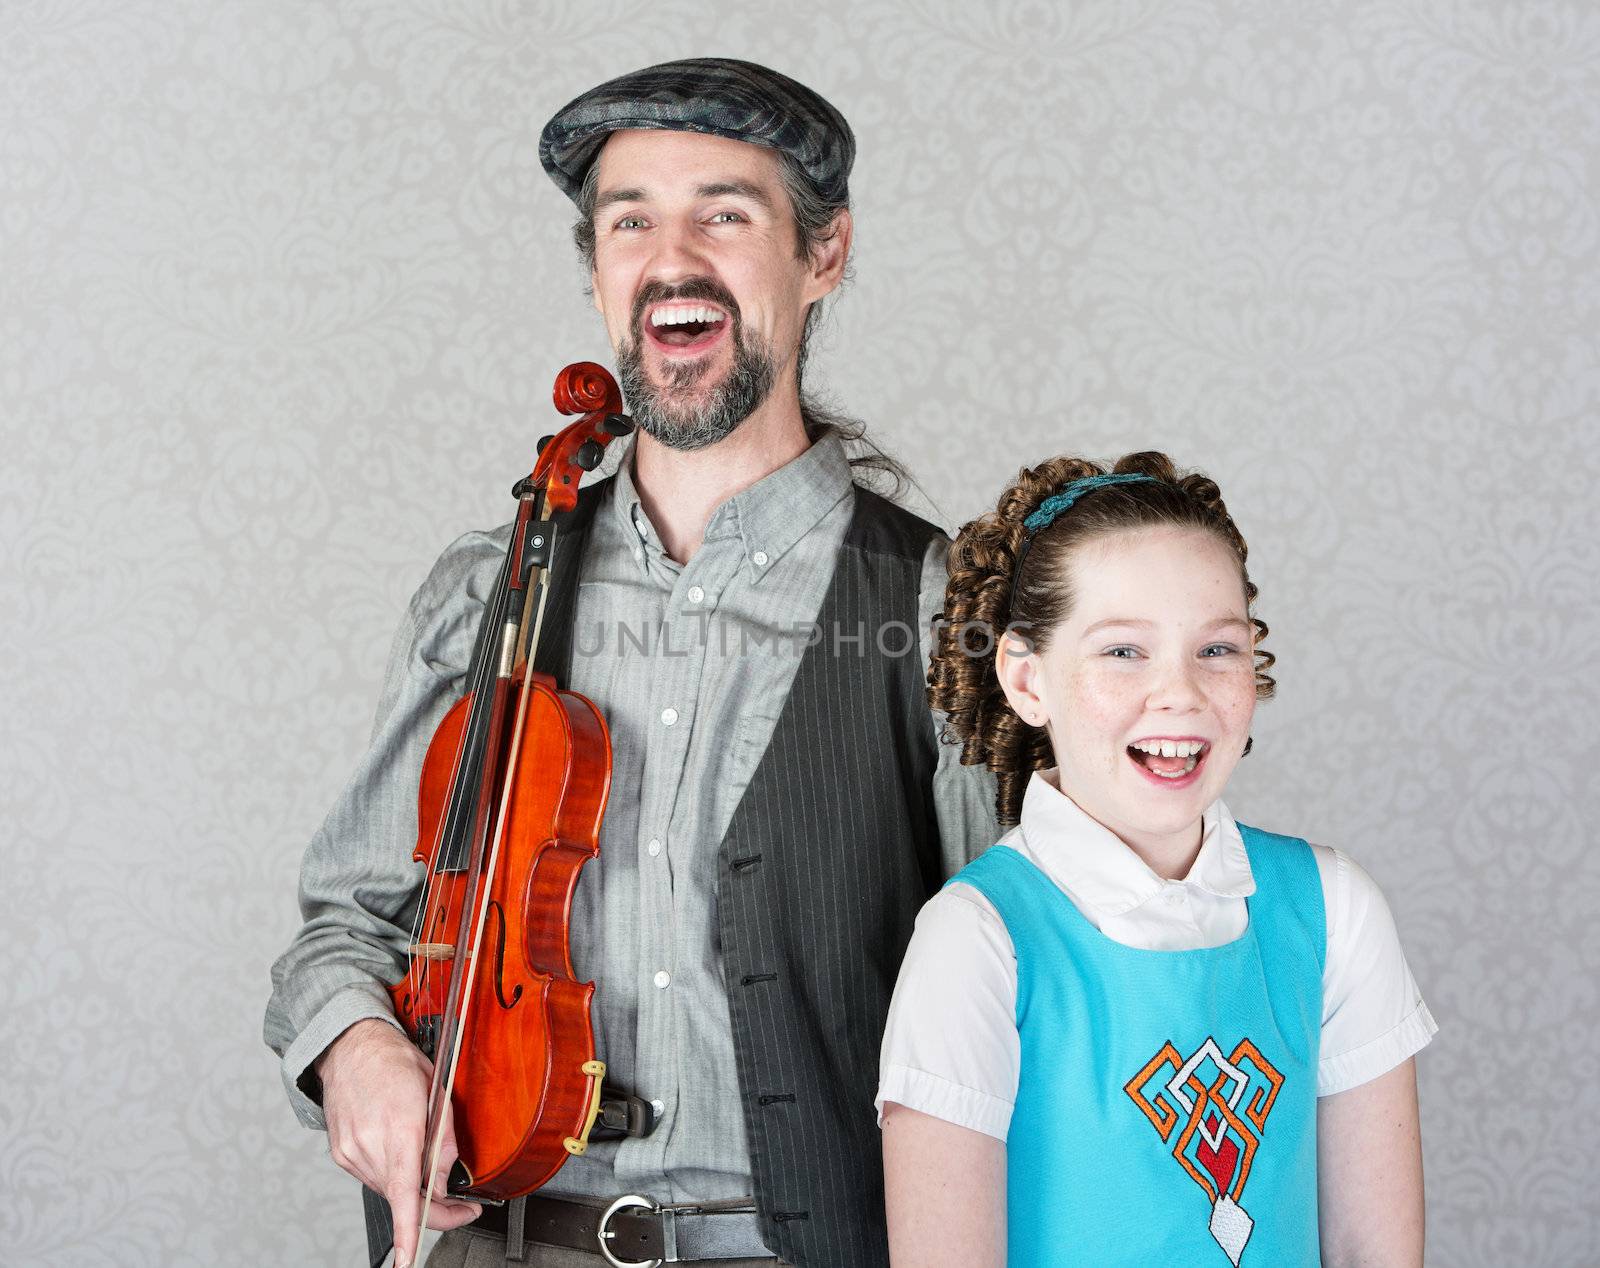 Laughing Irish folk fiddle player with happy child